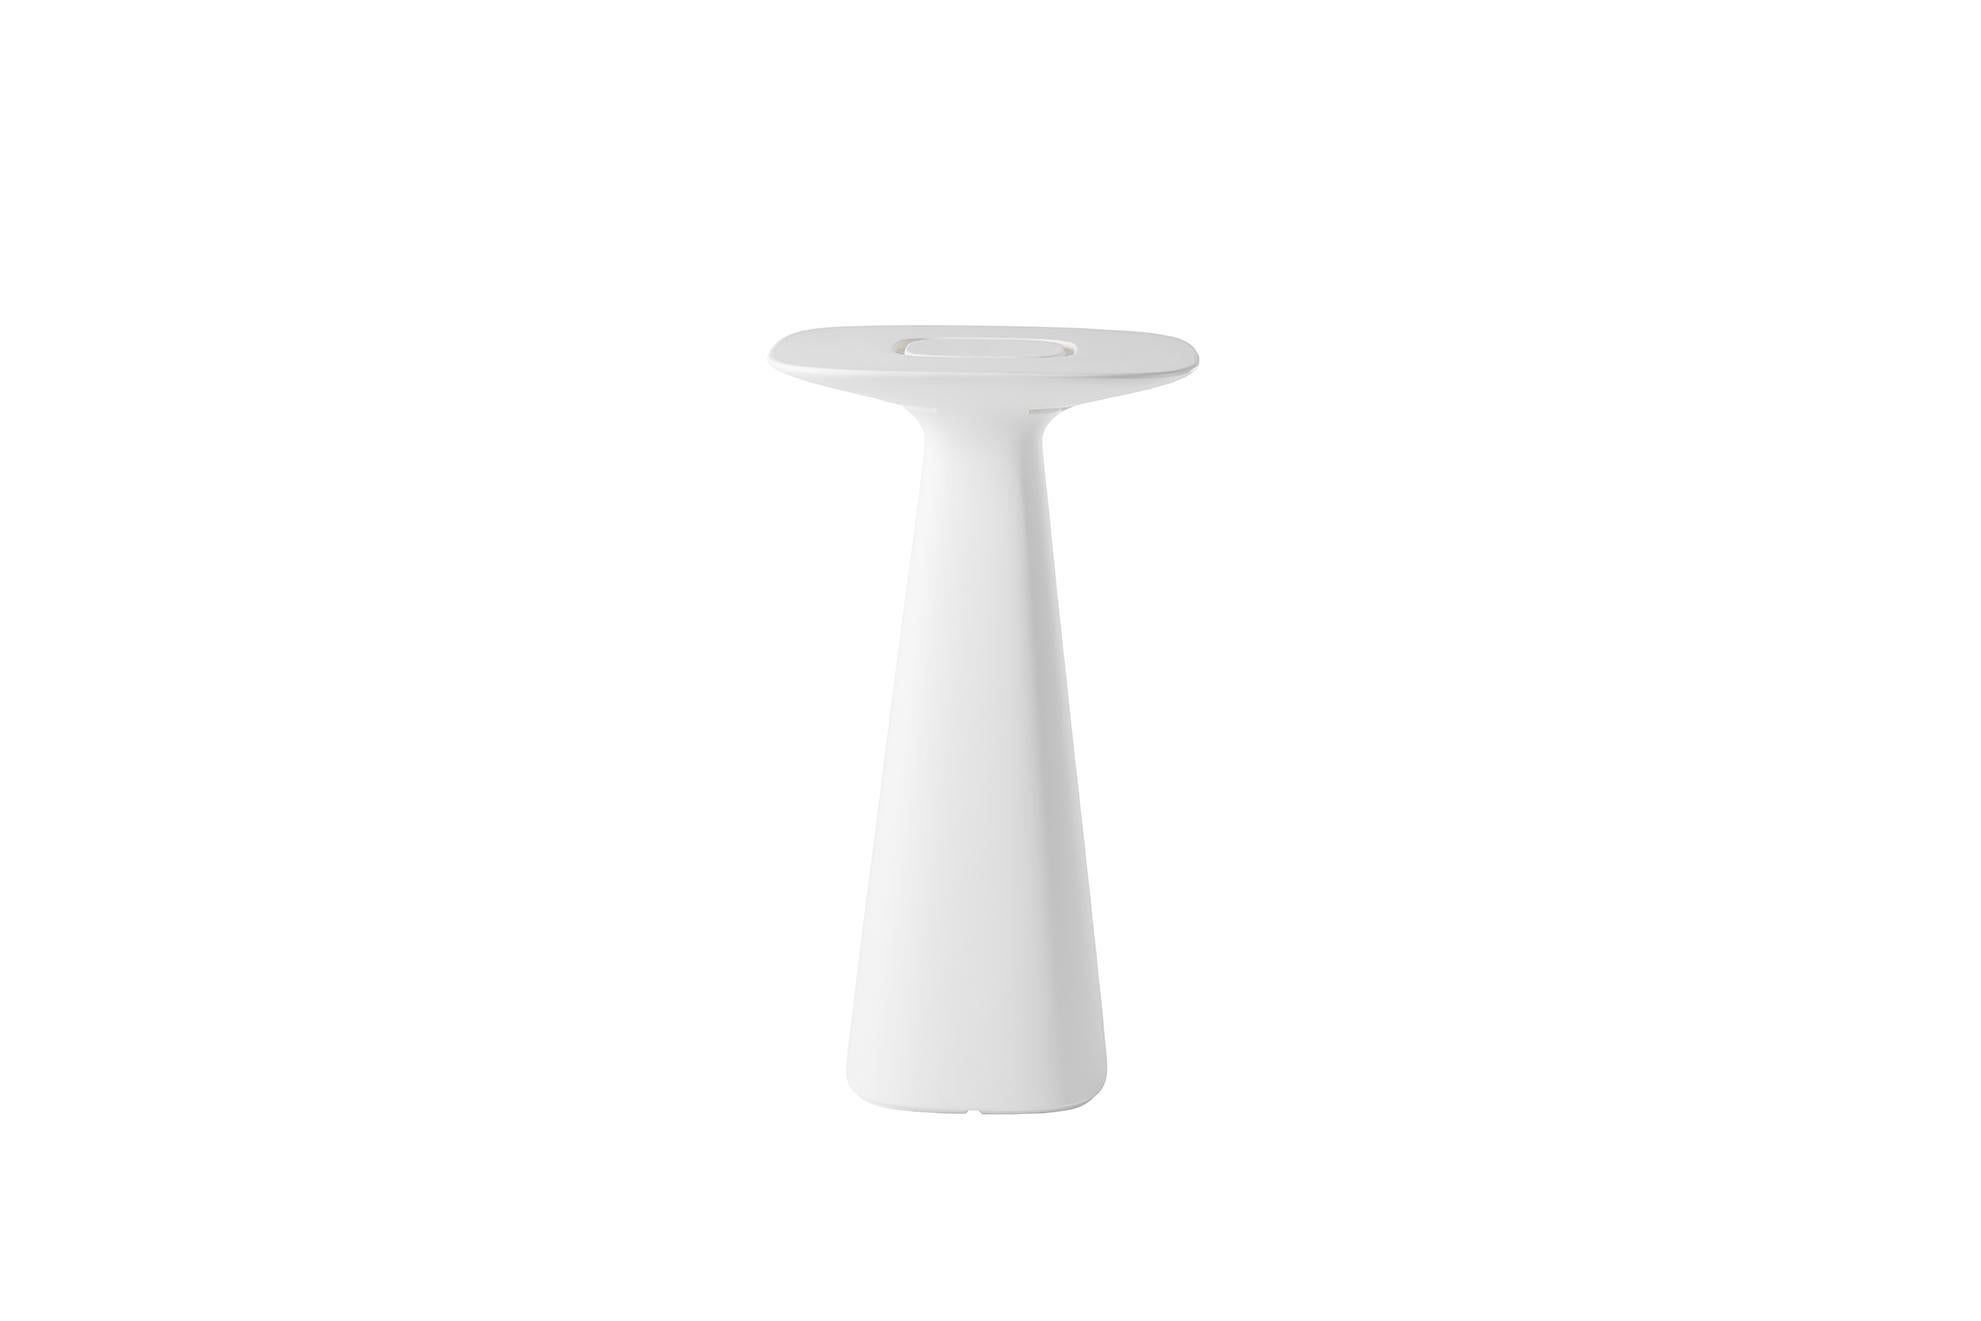 The conical shape characterizes the whole Amélie collection: Amélie Up is a high table and it has a conical stem. The cone is symbol of essentiality and stability: the shape is ideal to create a perfect element for contract projects, events and it